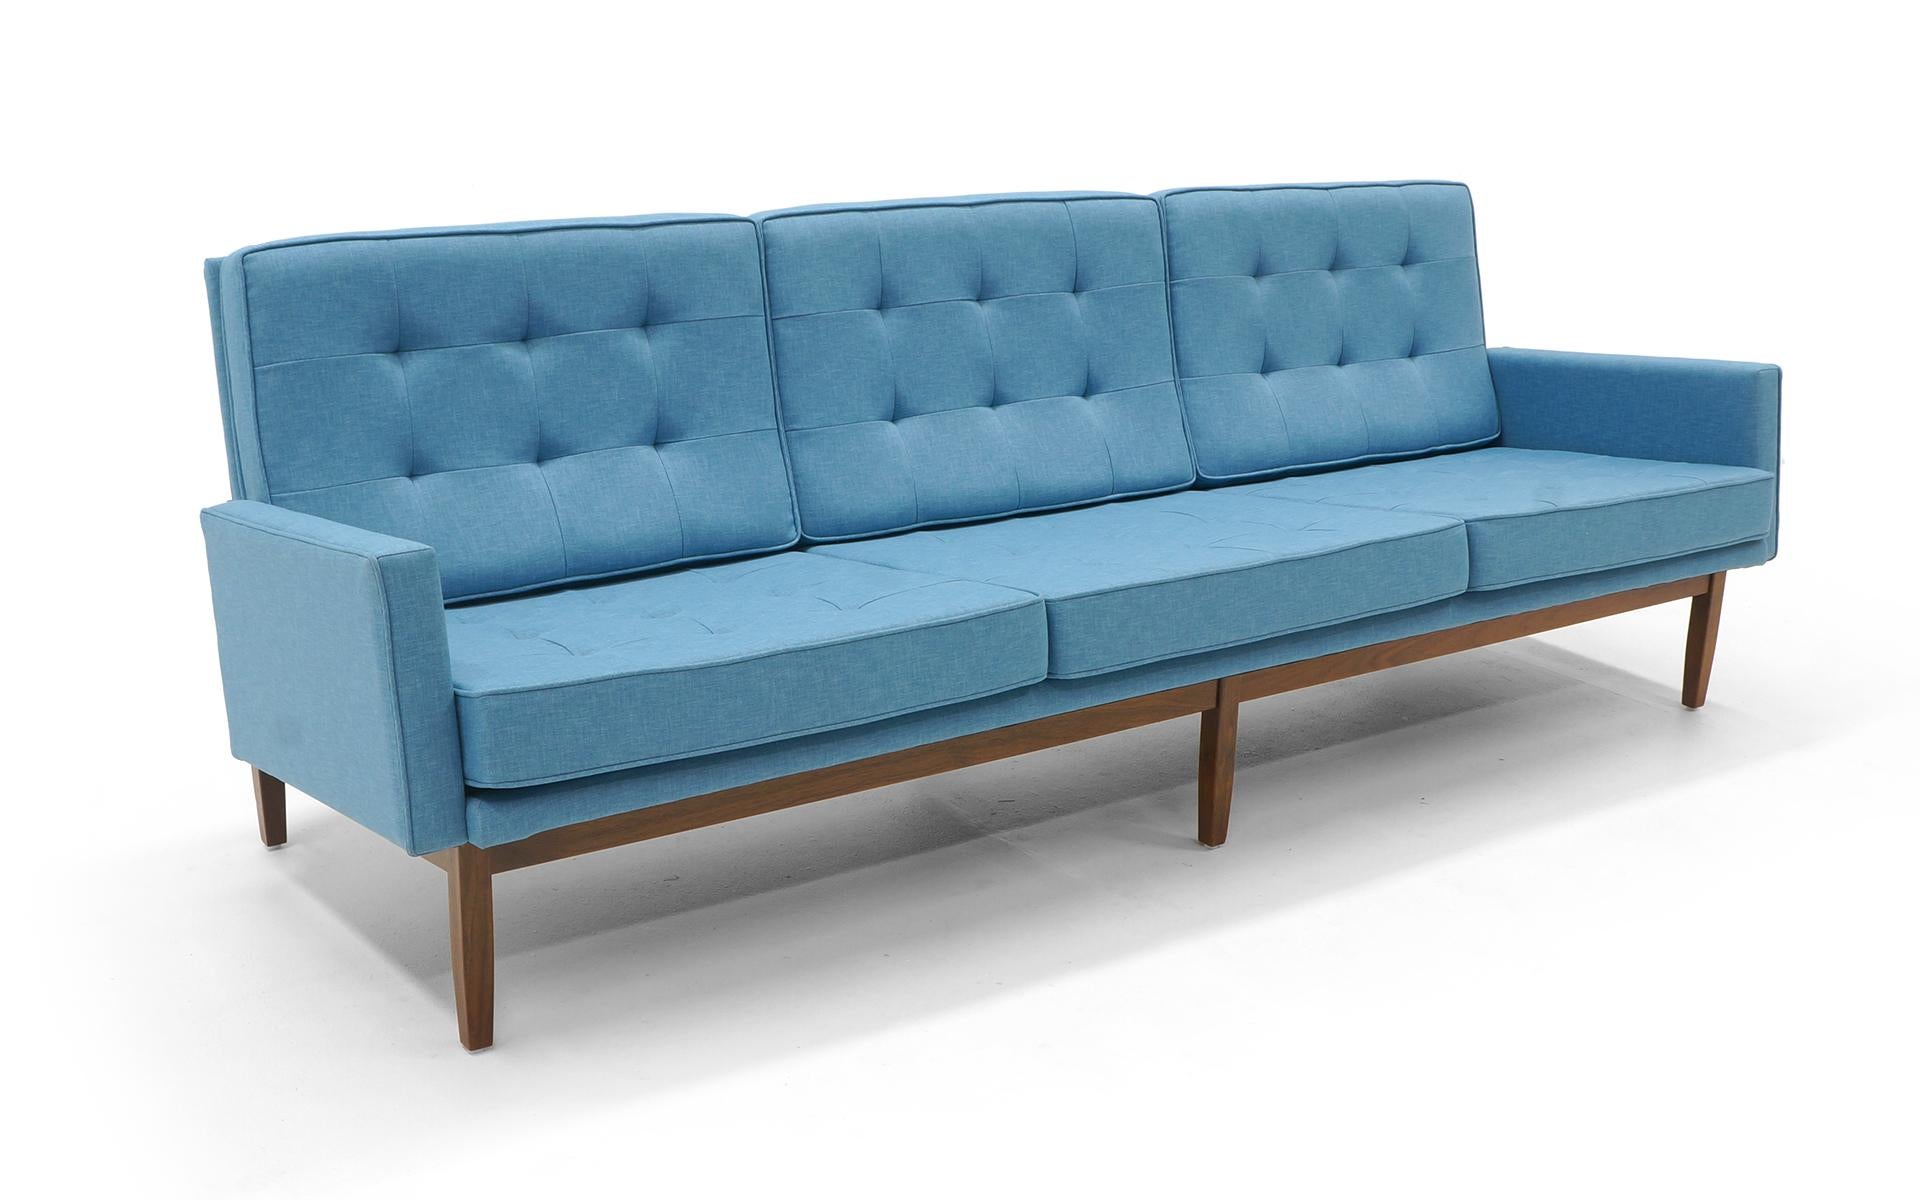 Classic florence Knoll tufted back sofa with the highly desirable walnut frame. Beautiful light blue color expertly restored and reupholstered. Excellent in every way.